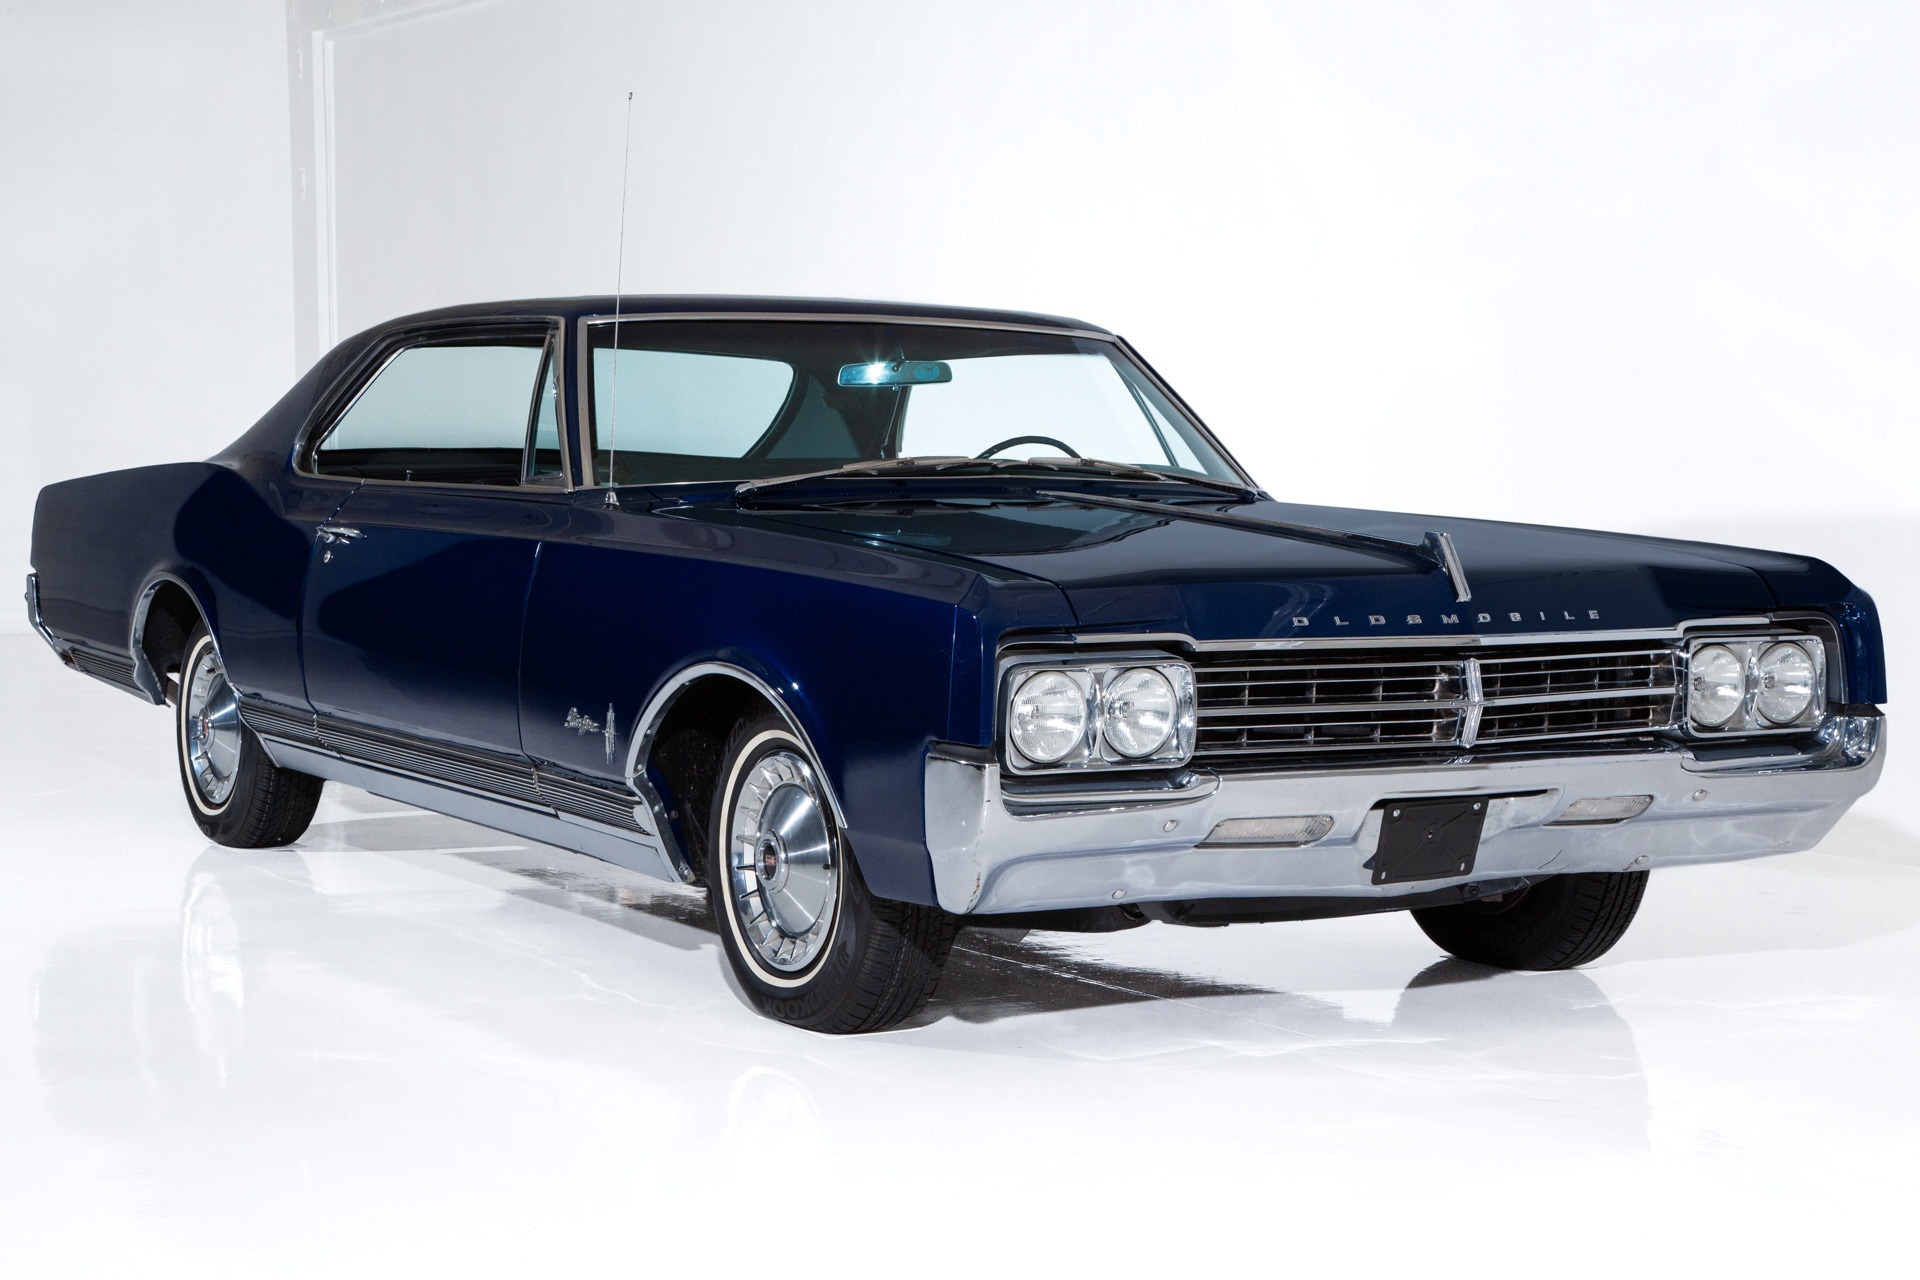 For Sale Used 1965 Oldsmobile Starfire Sapphire Blue 425ci, Very Well Kept | American Dream Machines Des Moines IA 50309